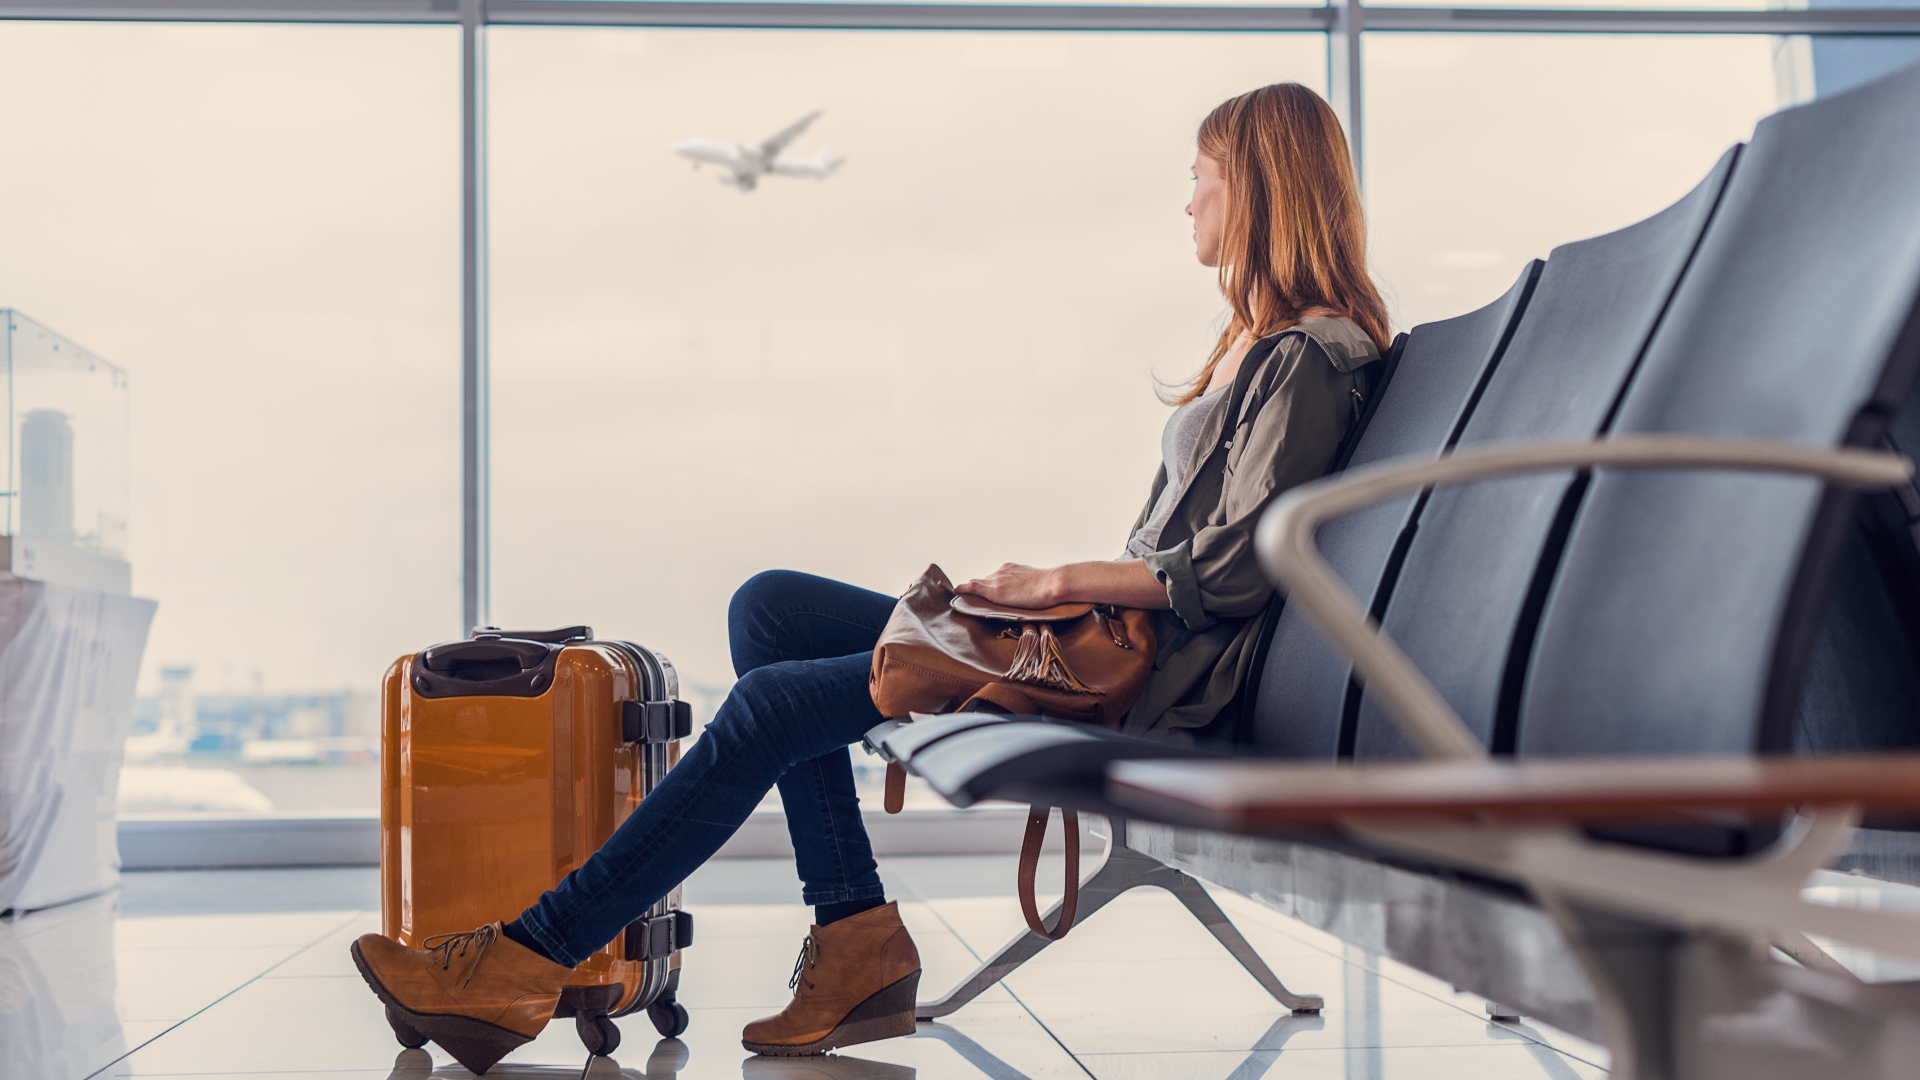 When their flight is delayed, it’s a huge mistake for passengers and could end up costing them a lot of money.